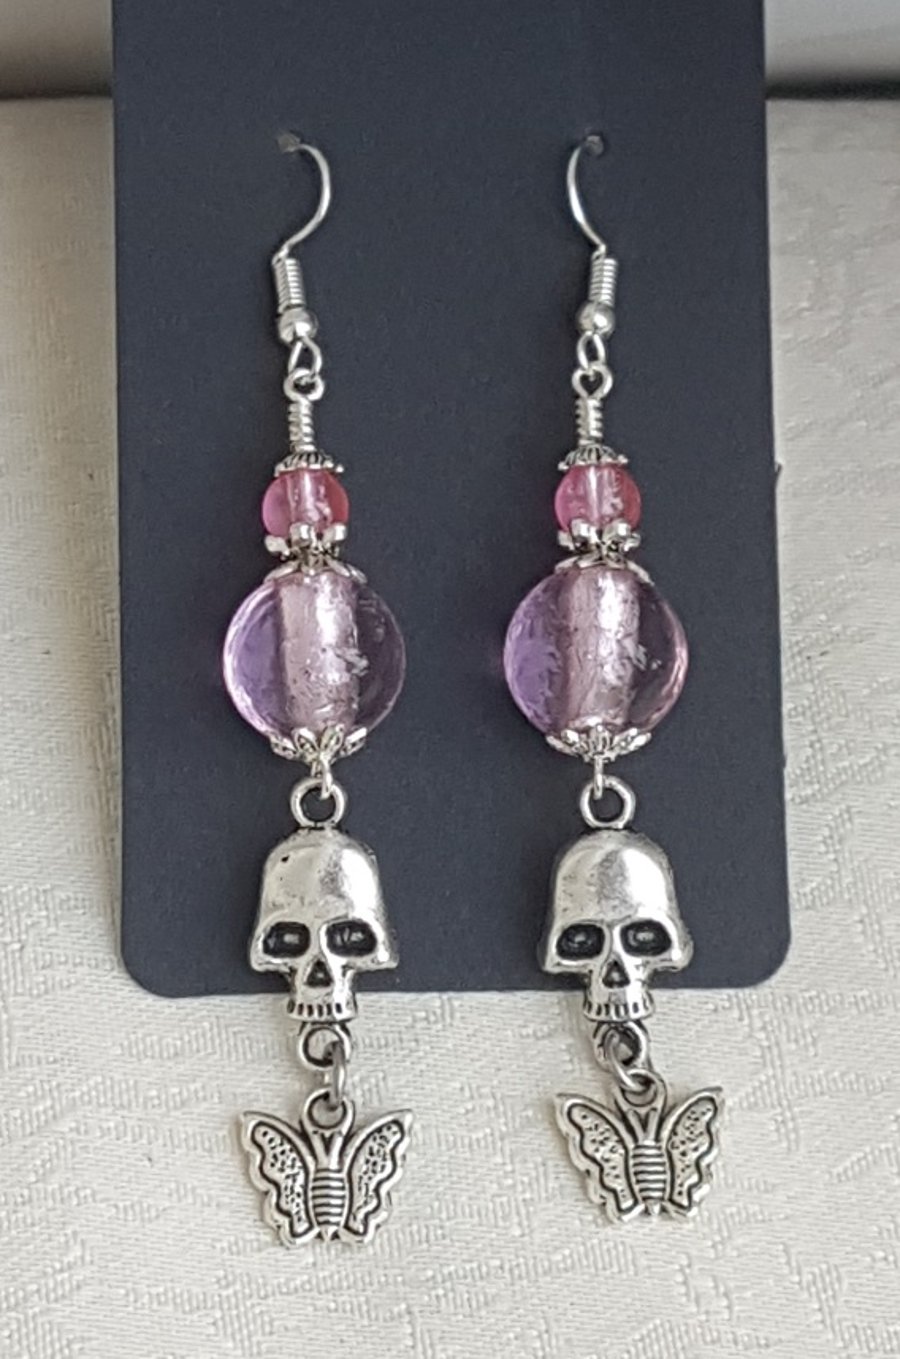 Pink Bead Earrings with Skull and Butterfly Charms.